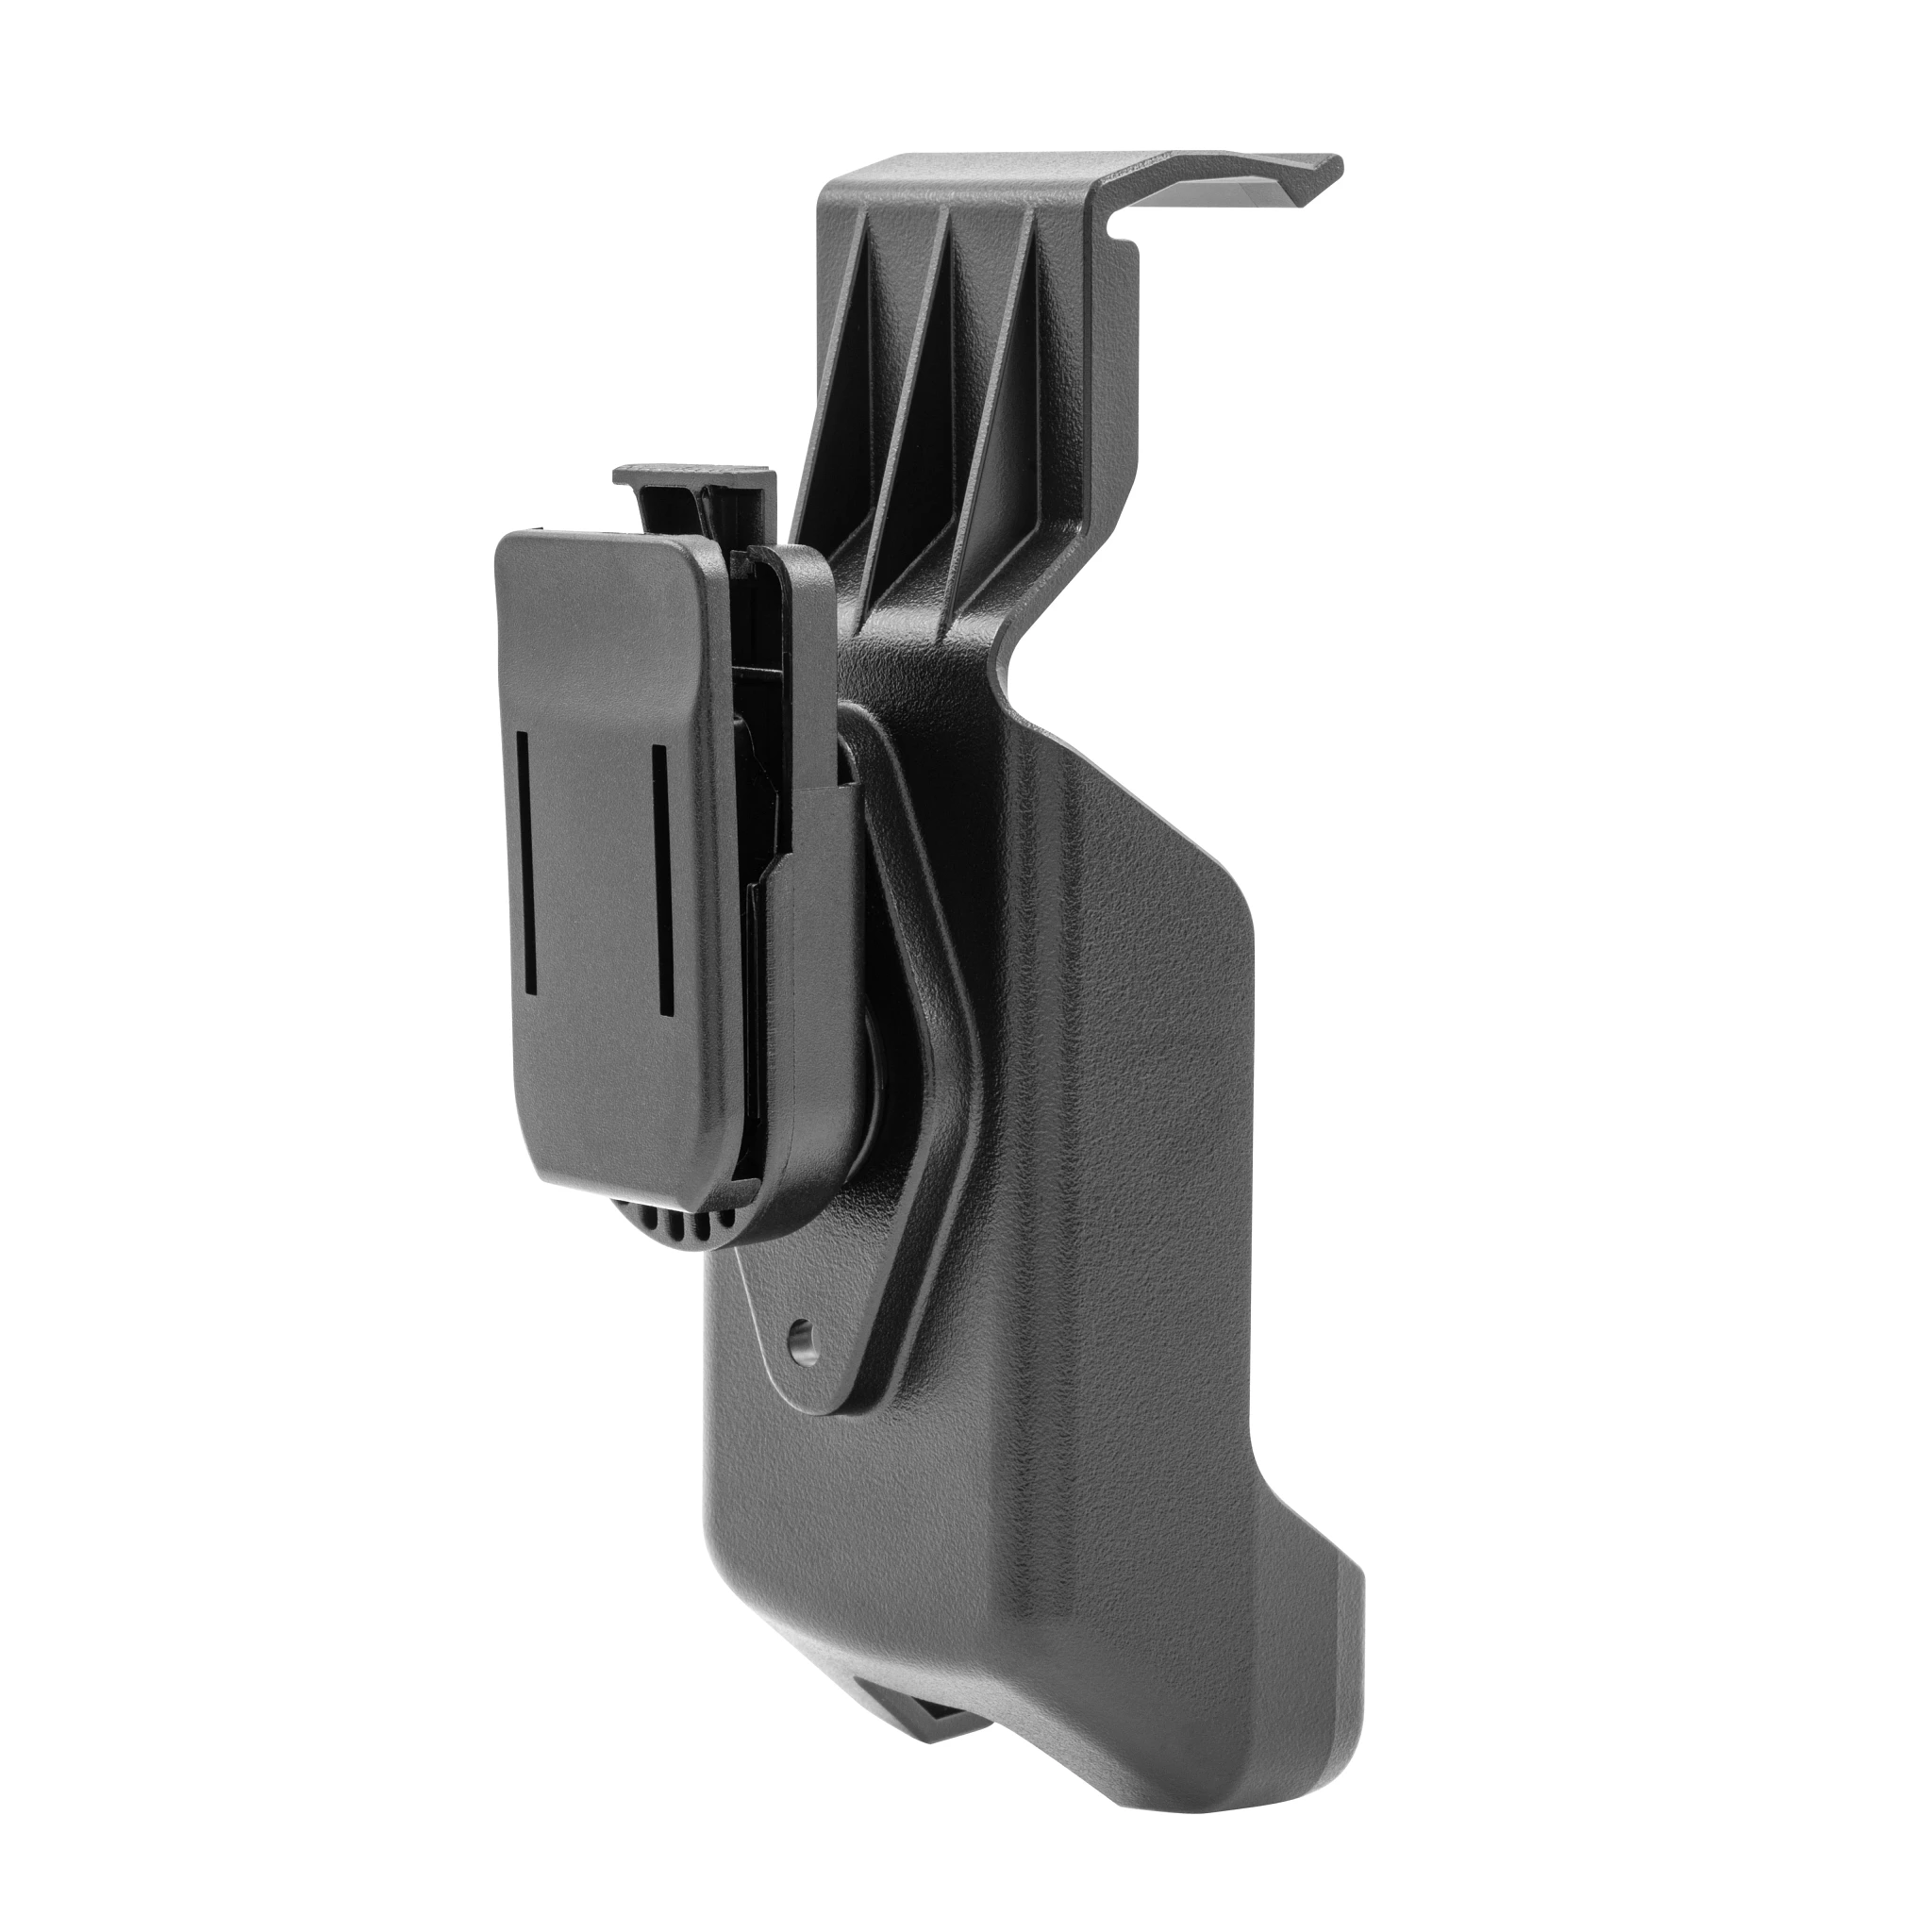 Advanced GPS Navigation Wireless Remote Cradle shown from a three-quarter back view with the clip component attached